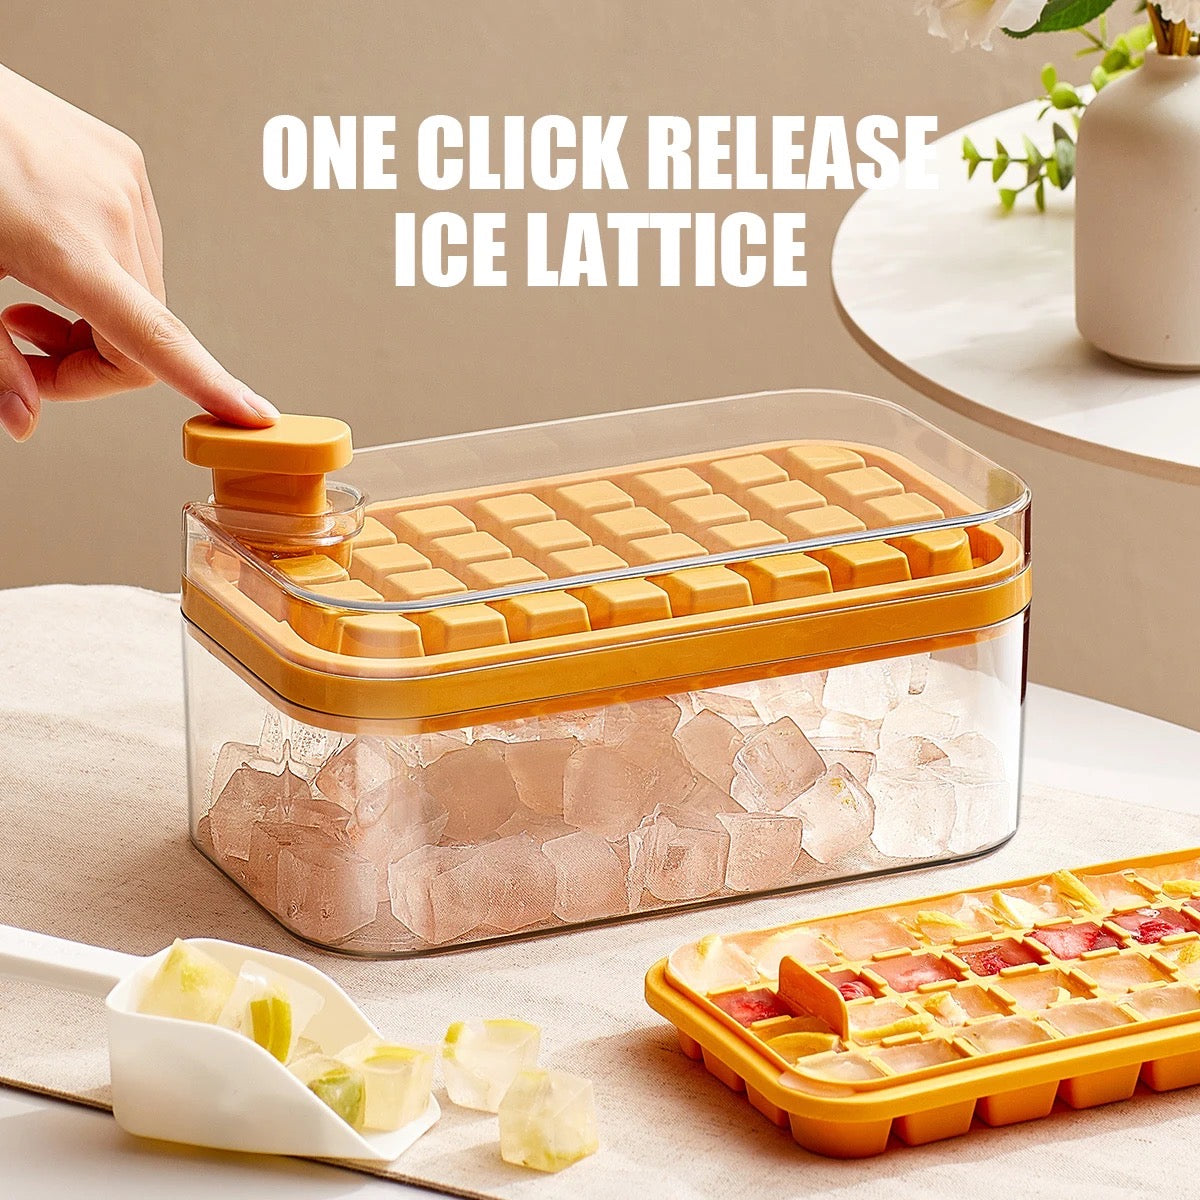 A durable, transparent ice tray with a one-click release mechanism, perfect for making ice cubes effortlessly